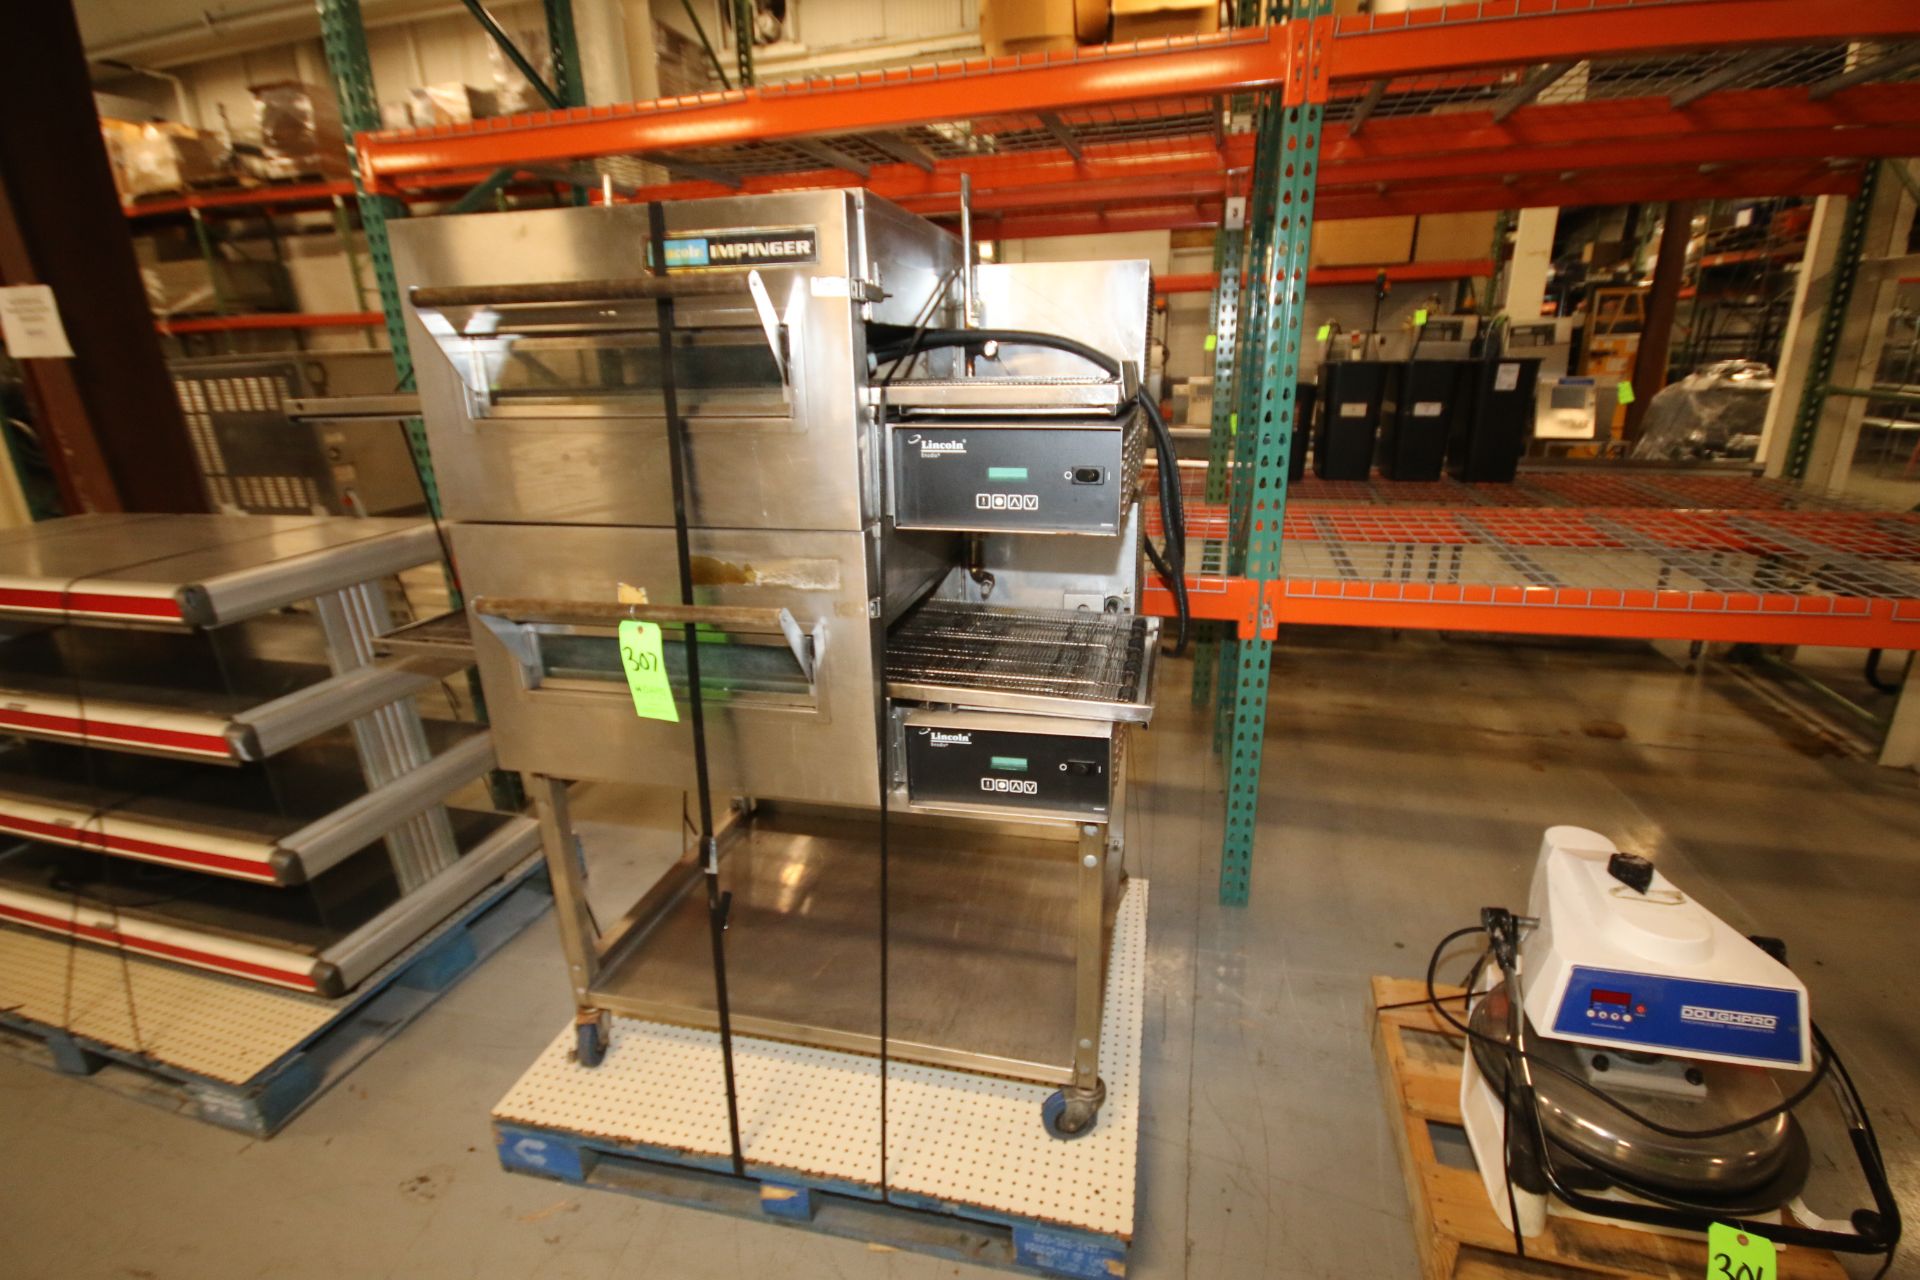 Lincoln Impinger Double Stack Conveyor Pizza Oven with Aprox. 53" L x 18" W x 3-1/4" W Product